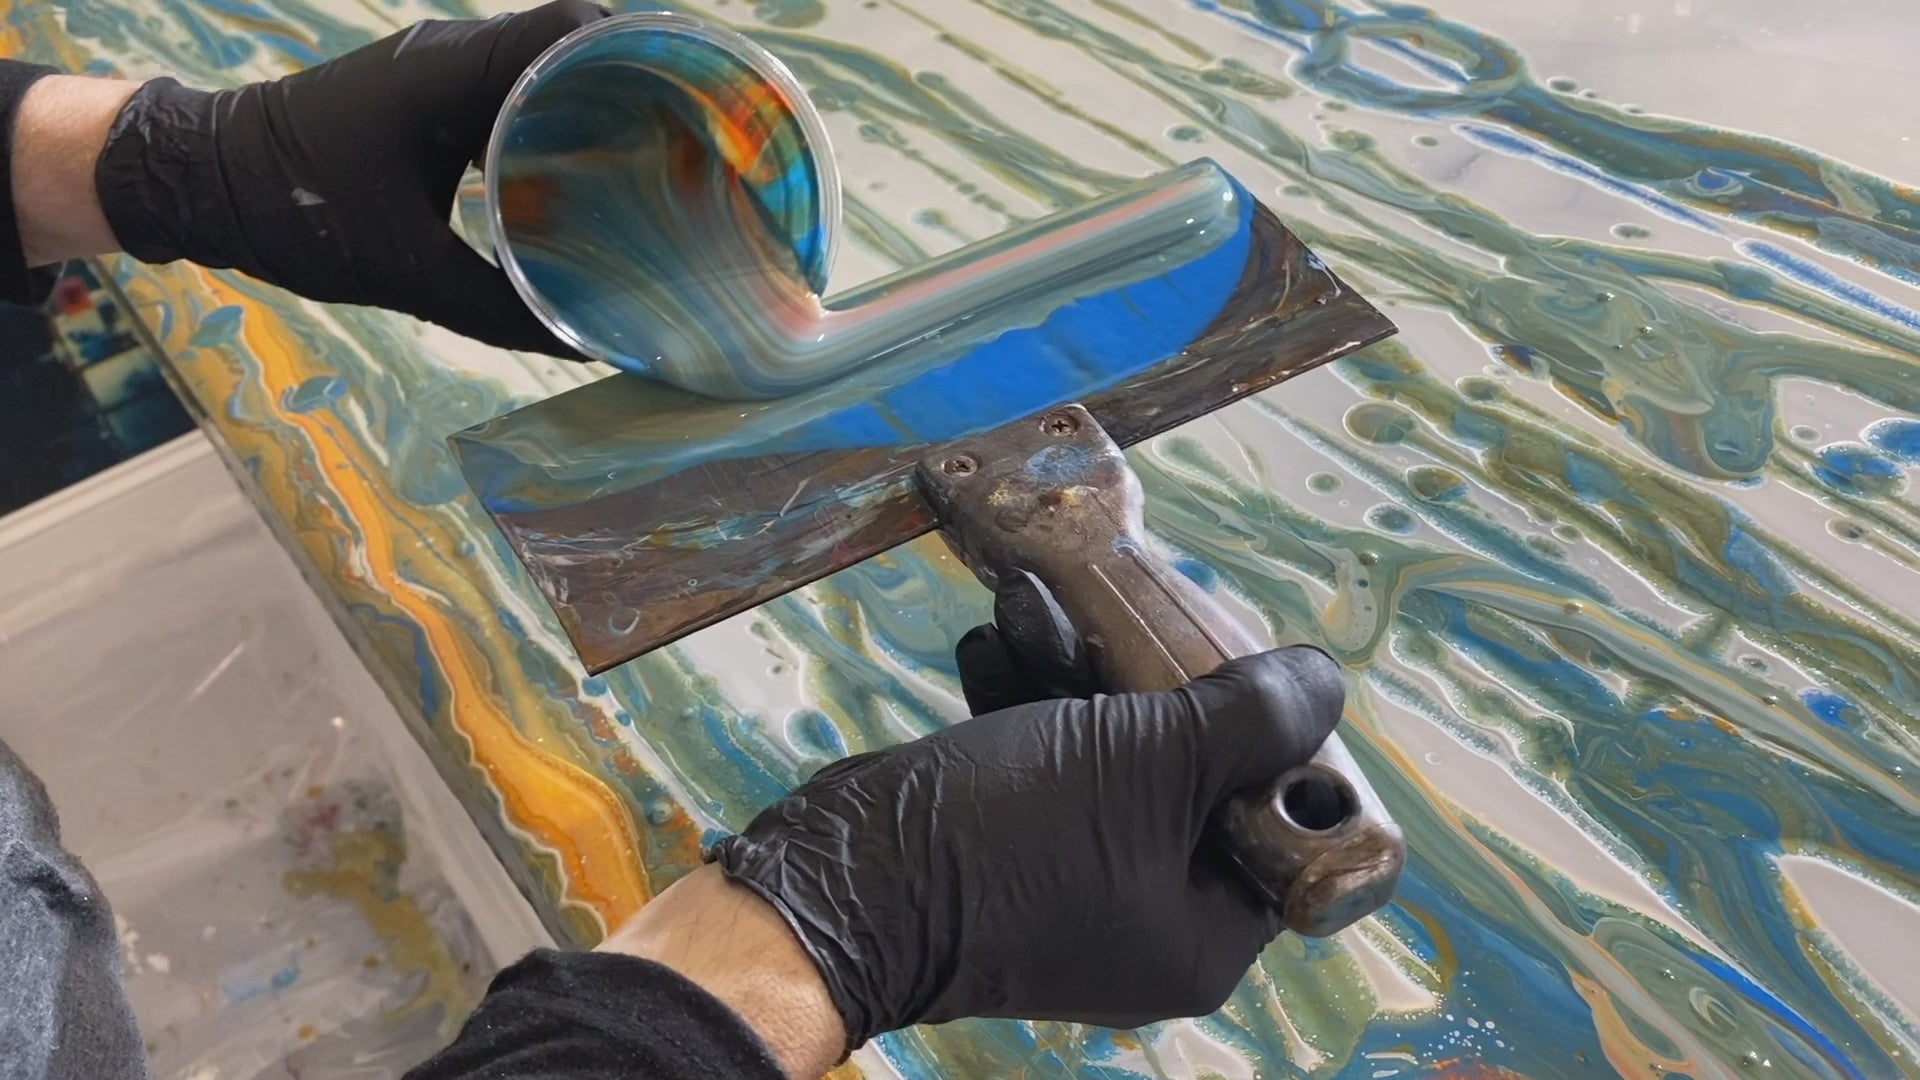 Stunning and sophisticated epoxy resin surface with a vibrant blend of colors.